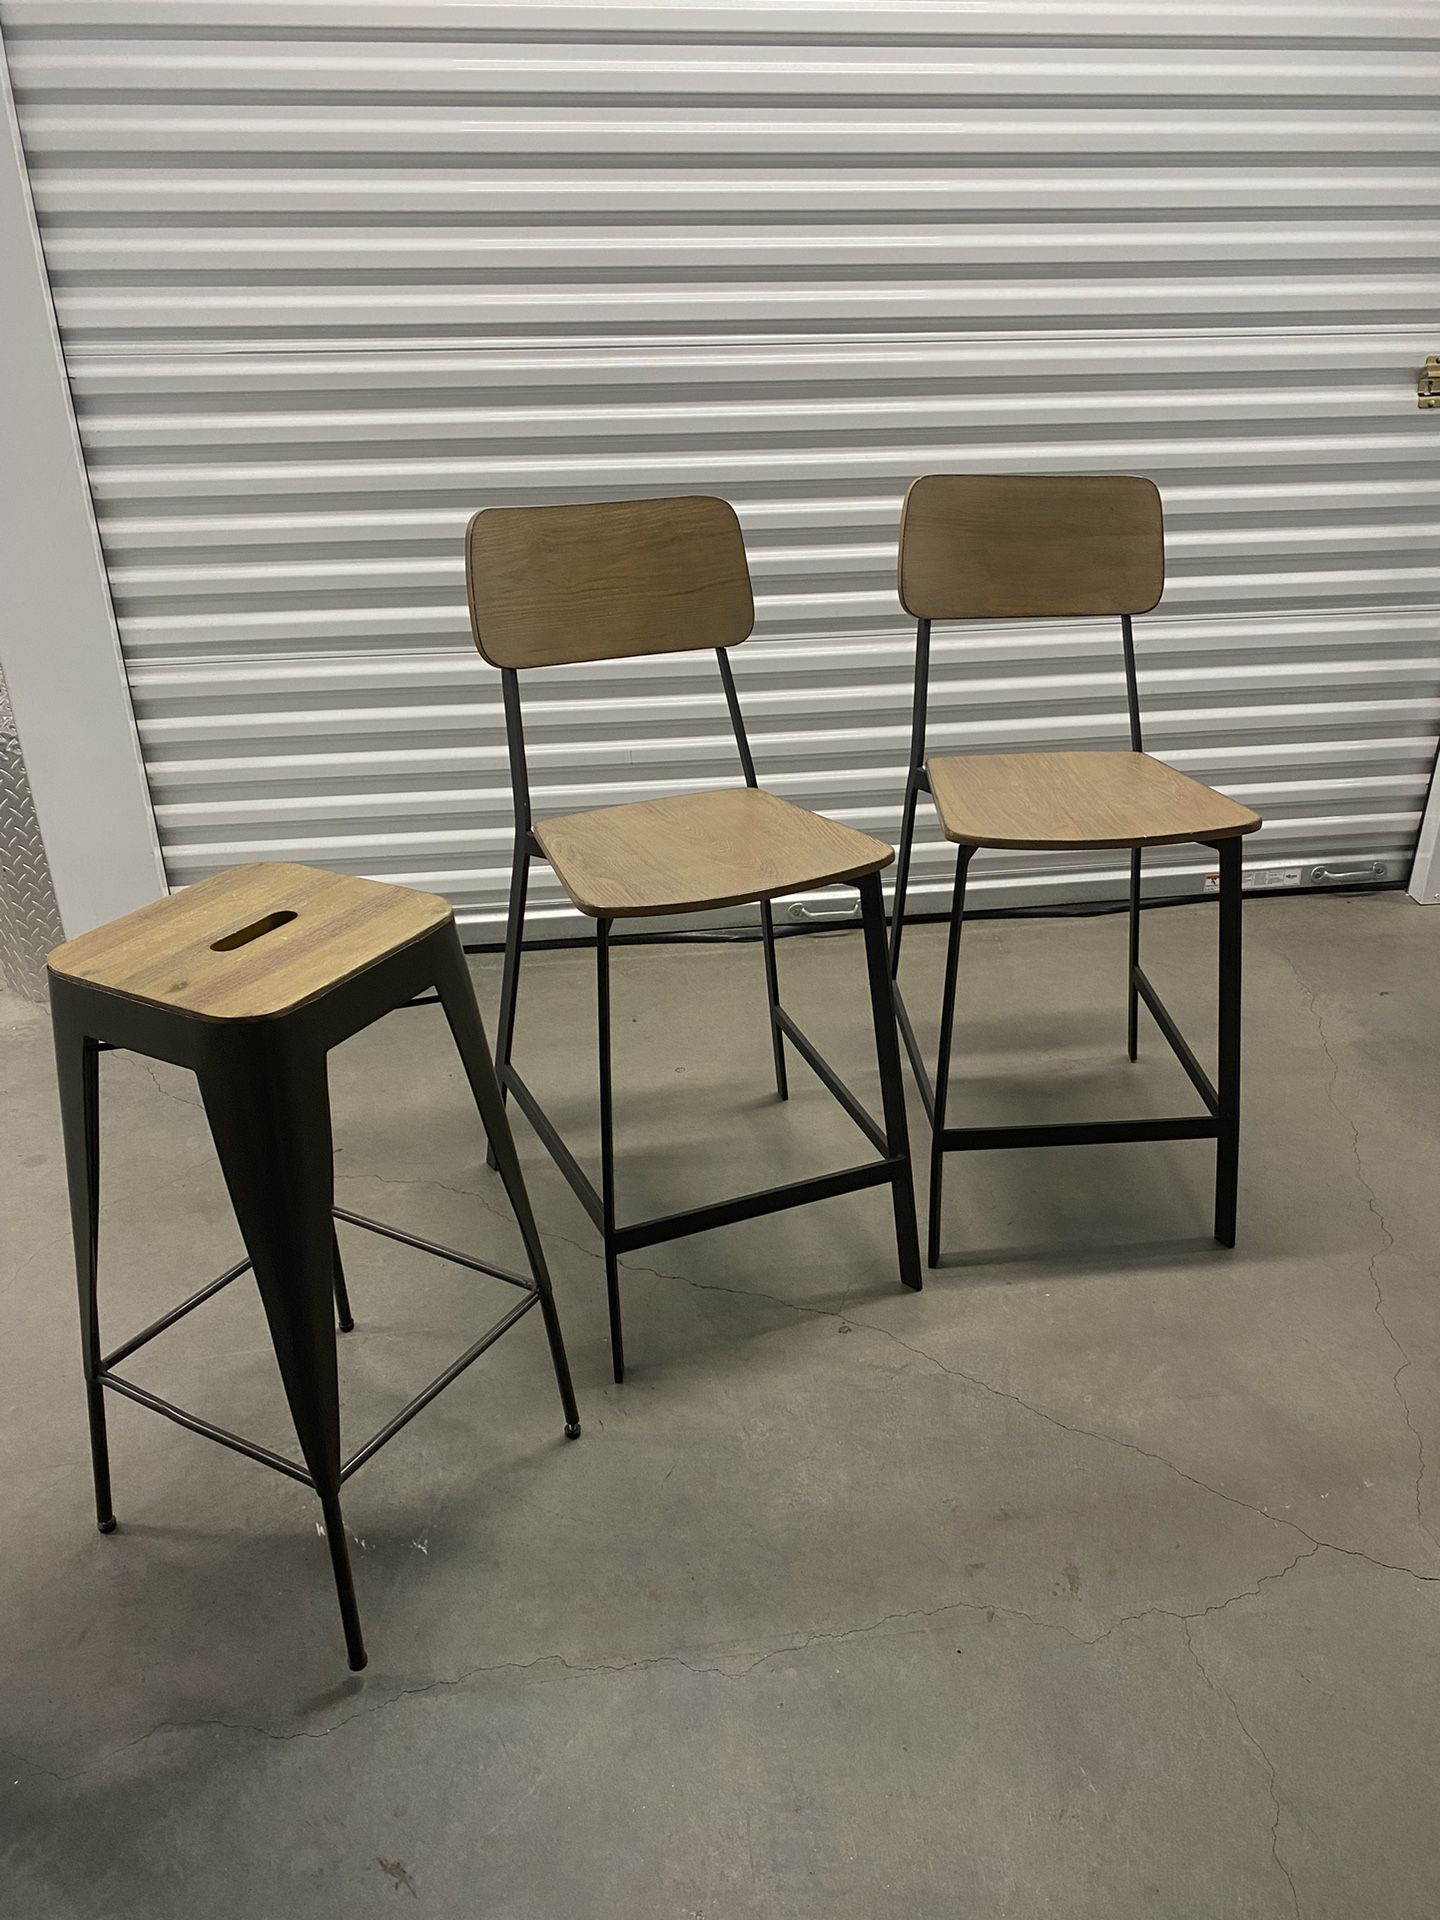 Bar Stools And Chair